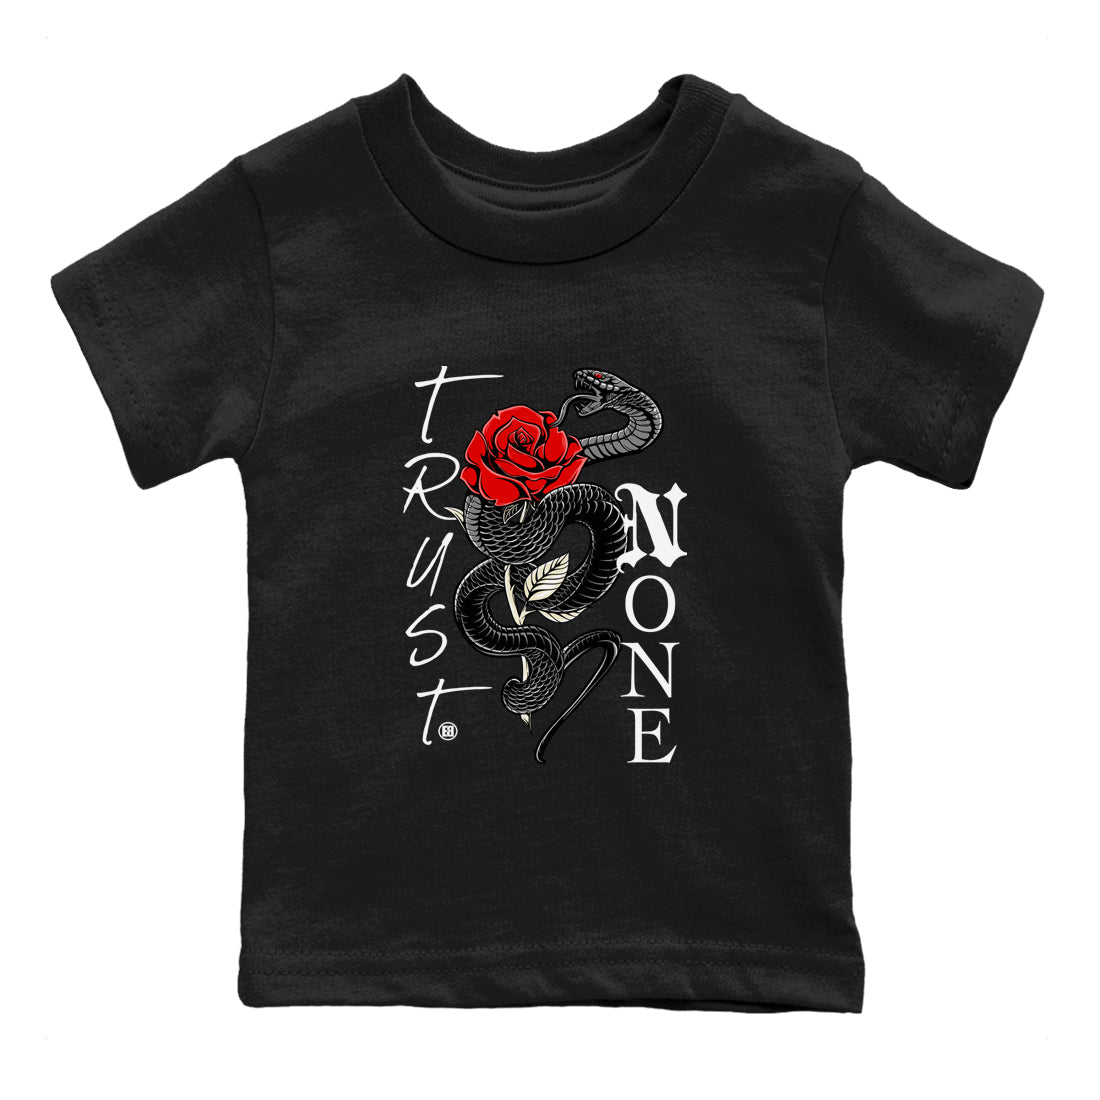 1s Black Toe Reimagined shirts to match jordans Trust None sneaker match tees Air Jordan 1 Black Toe Reimagined SNRT Sneaker Tees streetwear brand Baby and Youth Black 2 cotton tee